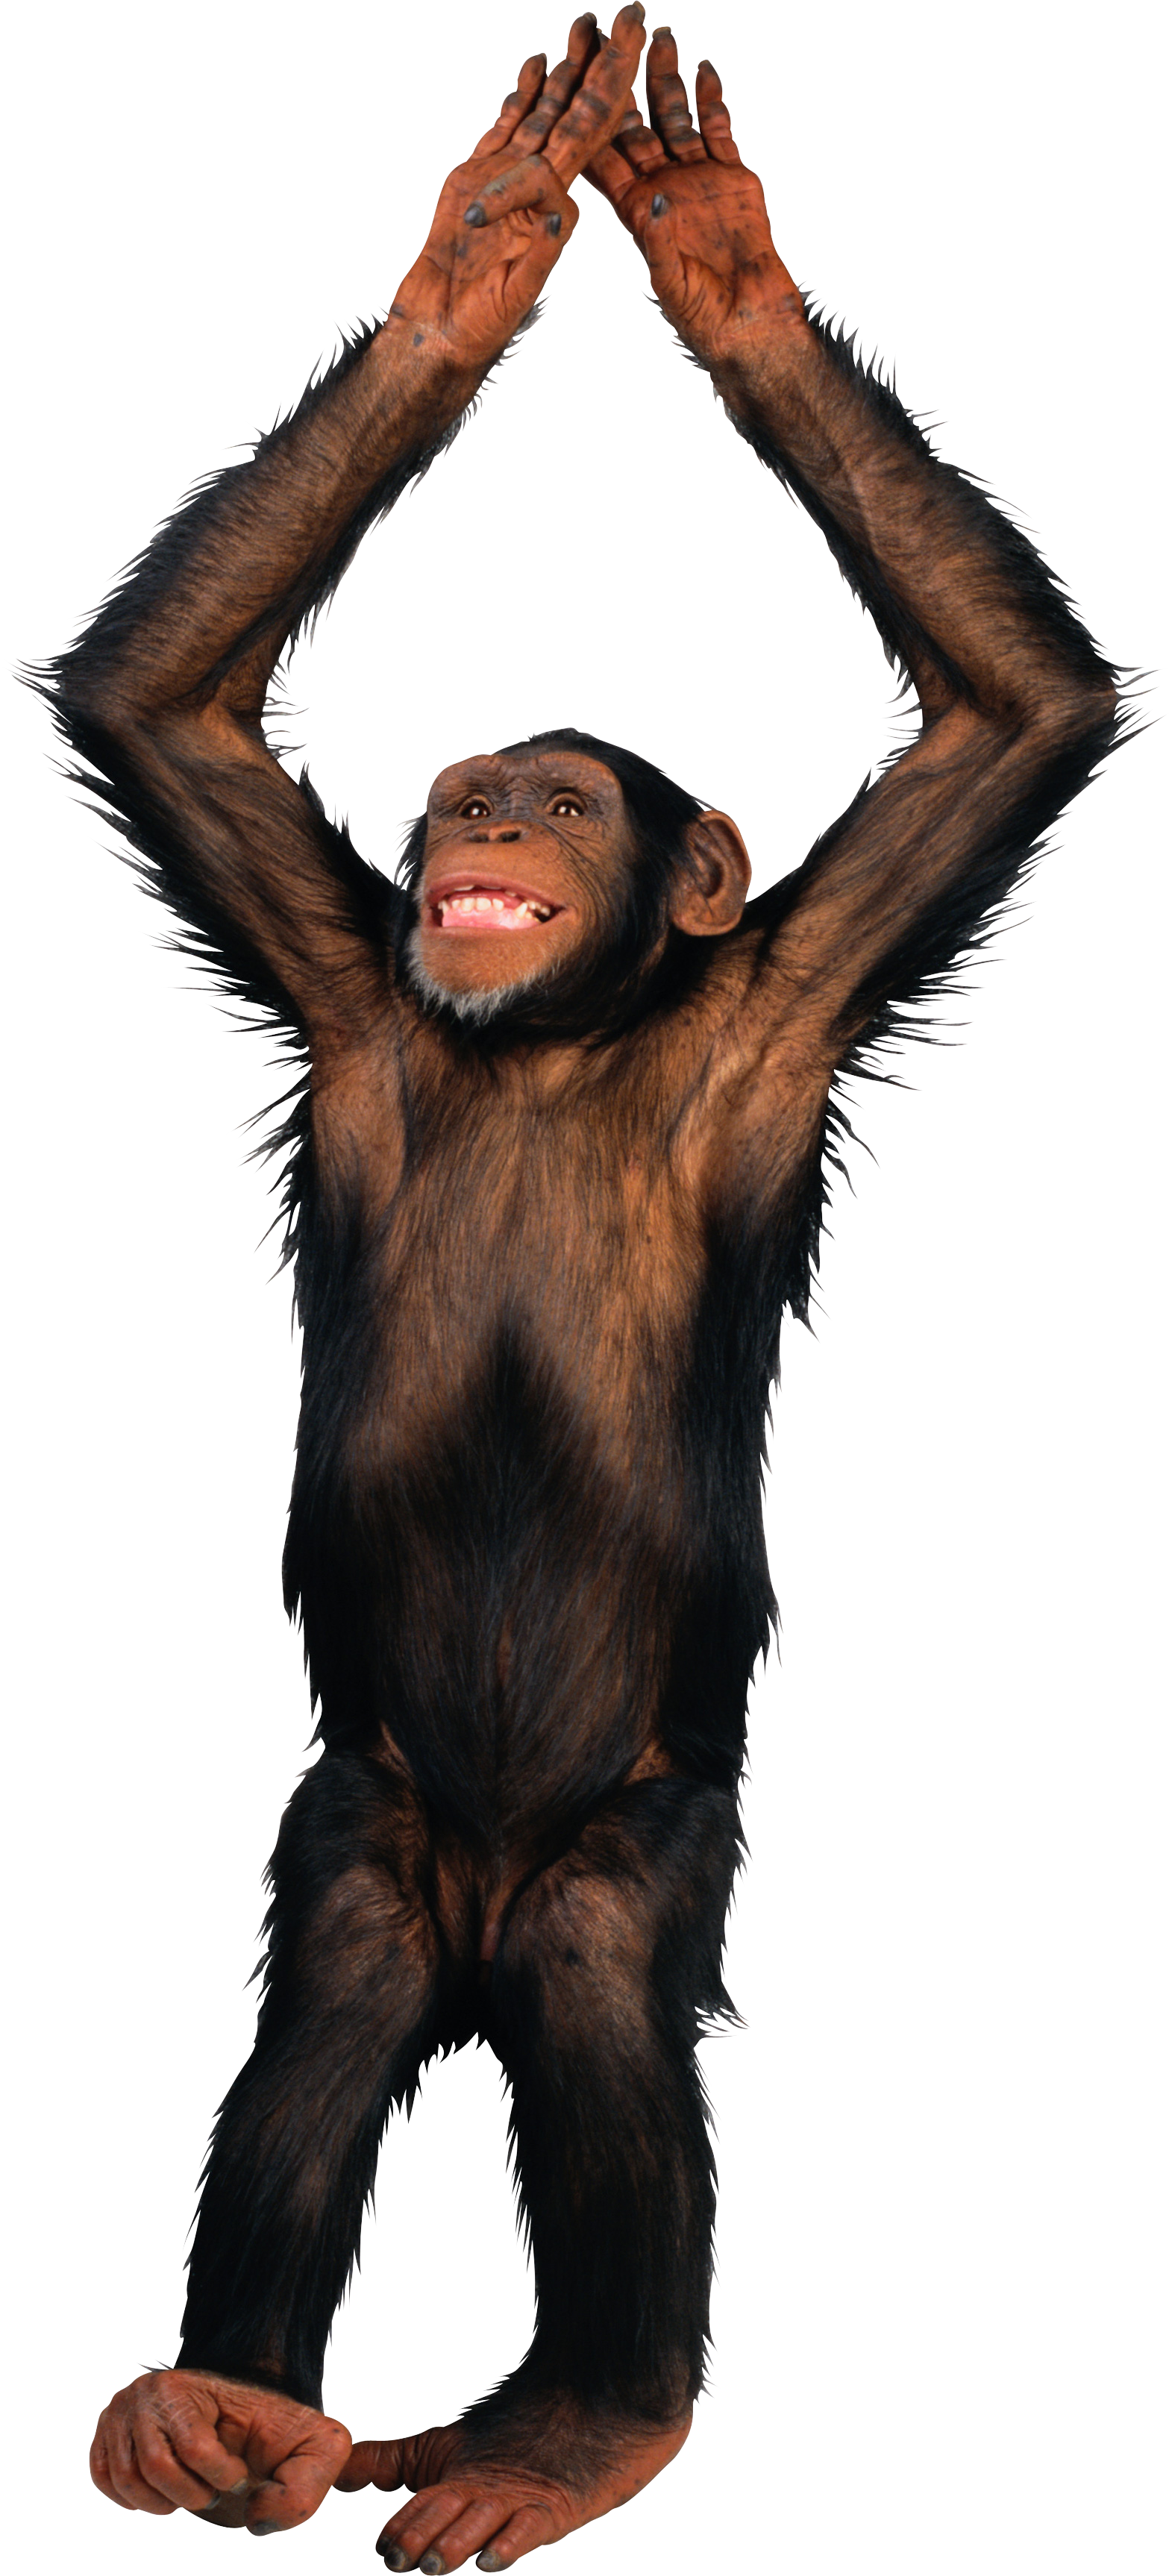 Monkey PNG images free download.